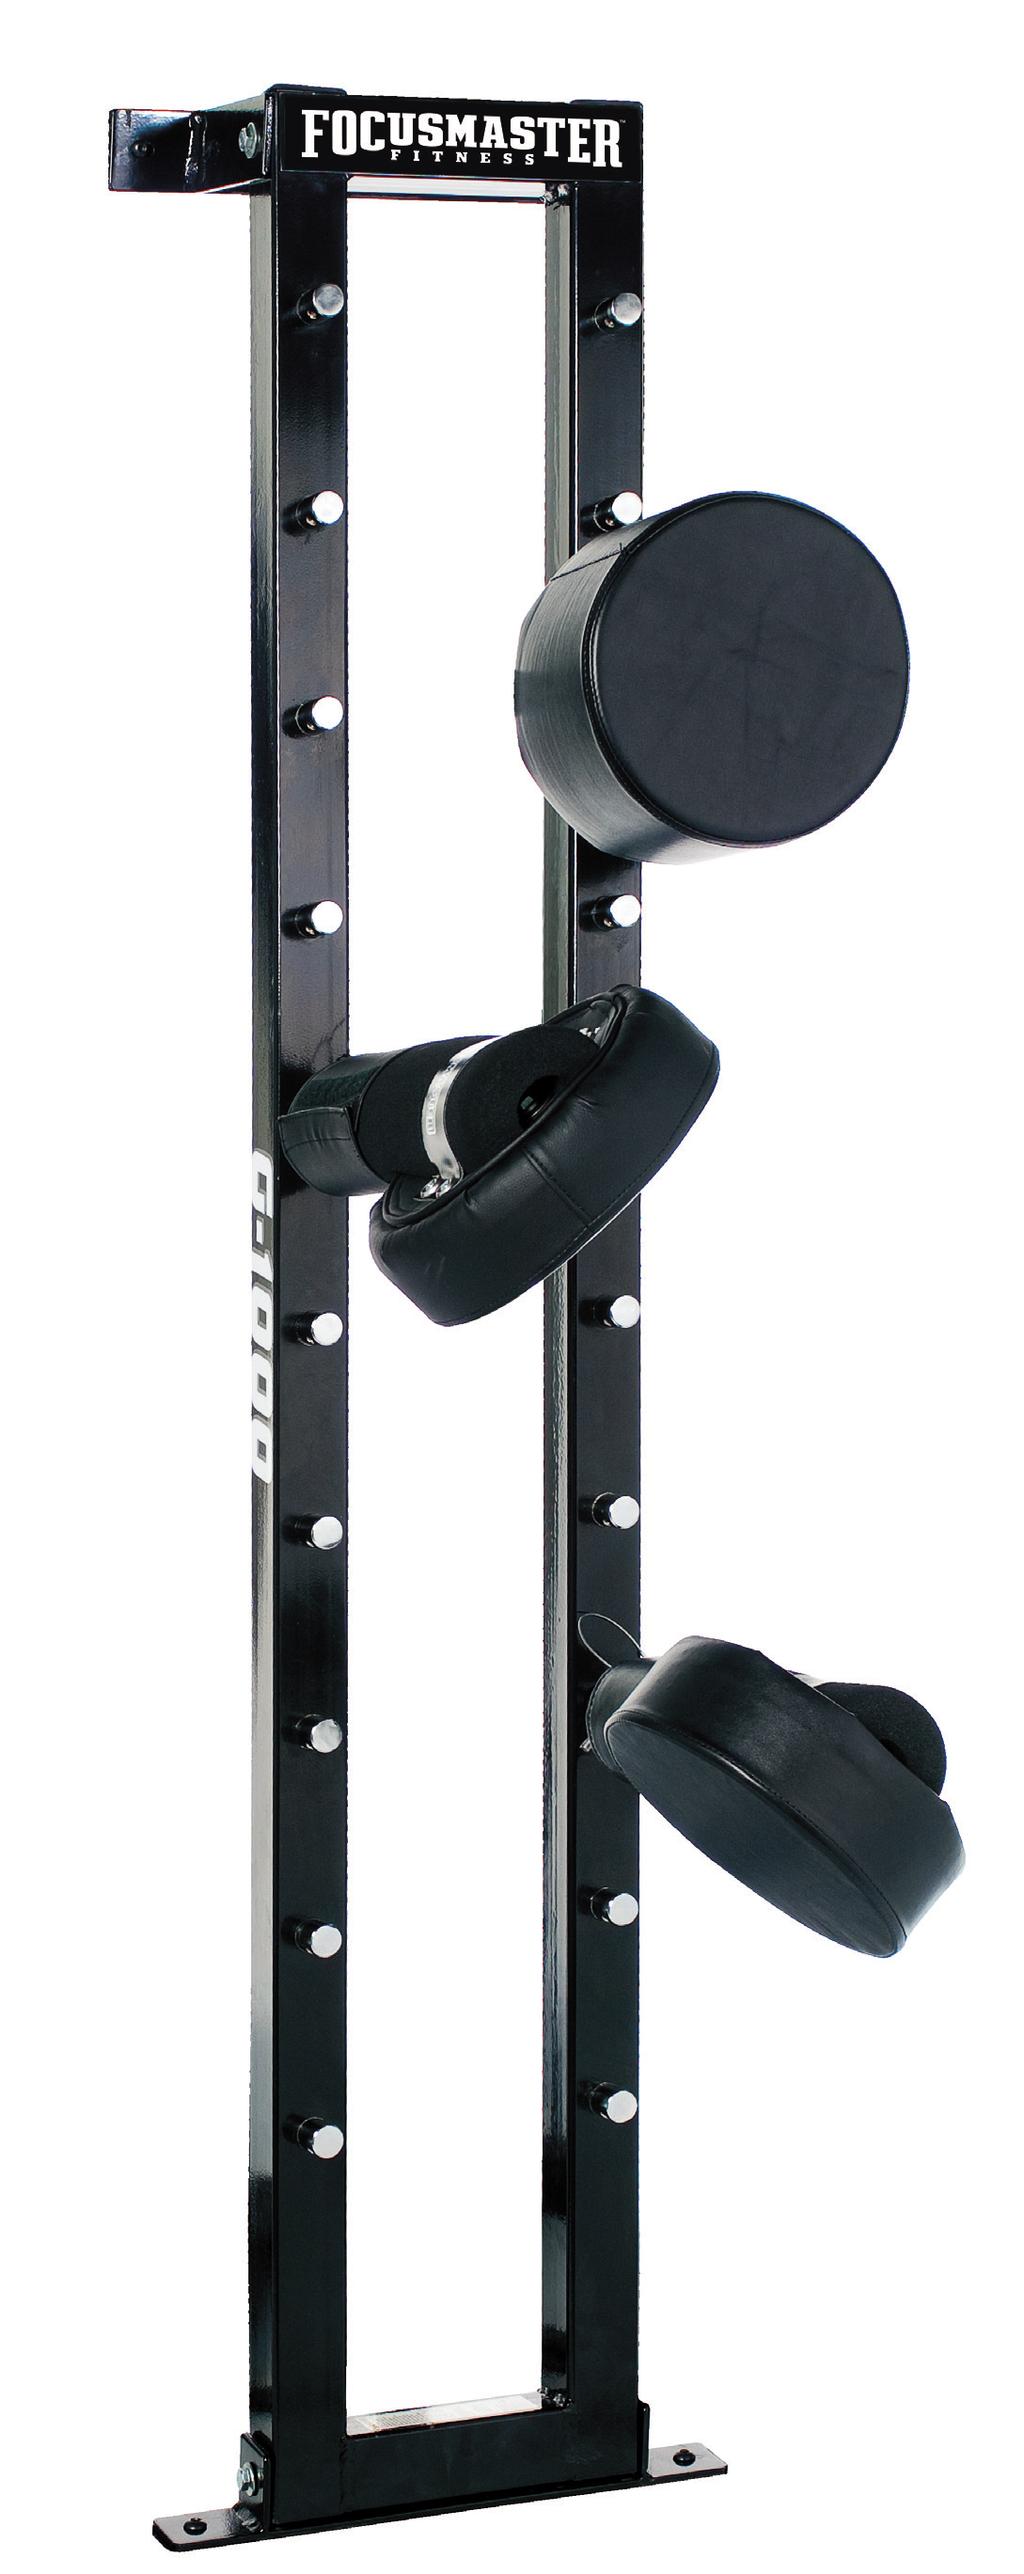 The Focusmaster G-1000 is the Ultimate Strike Training Machine for fitness, martial arts, boxing and law enforcement.